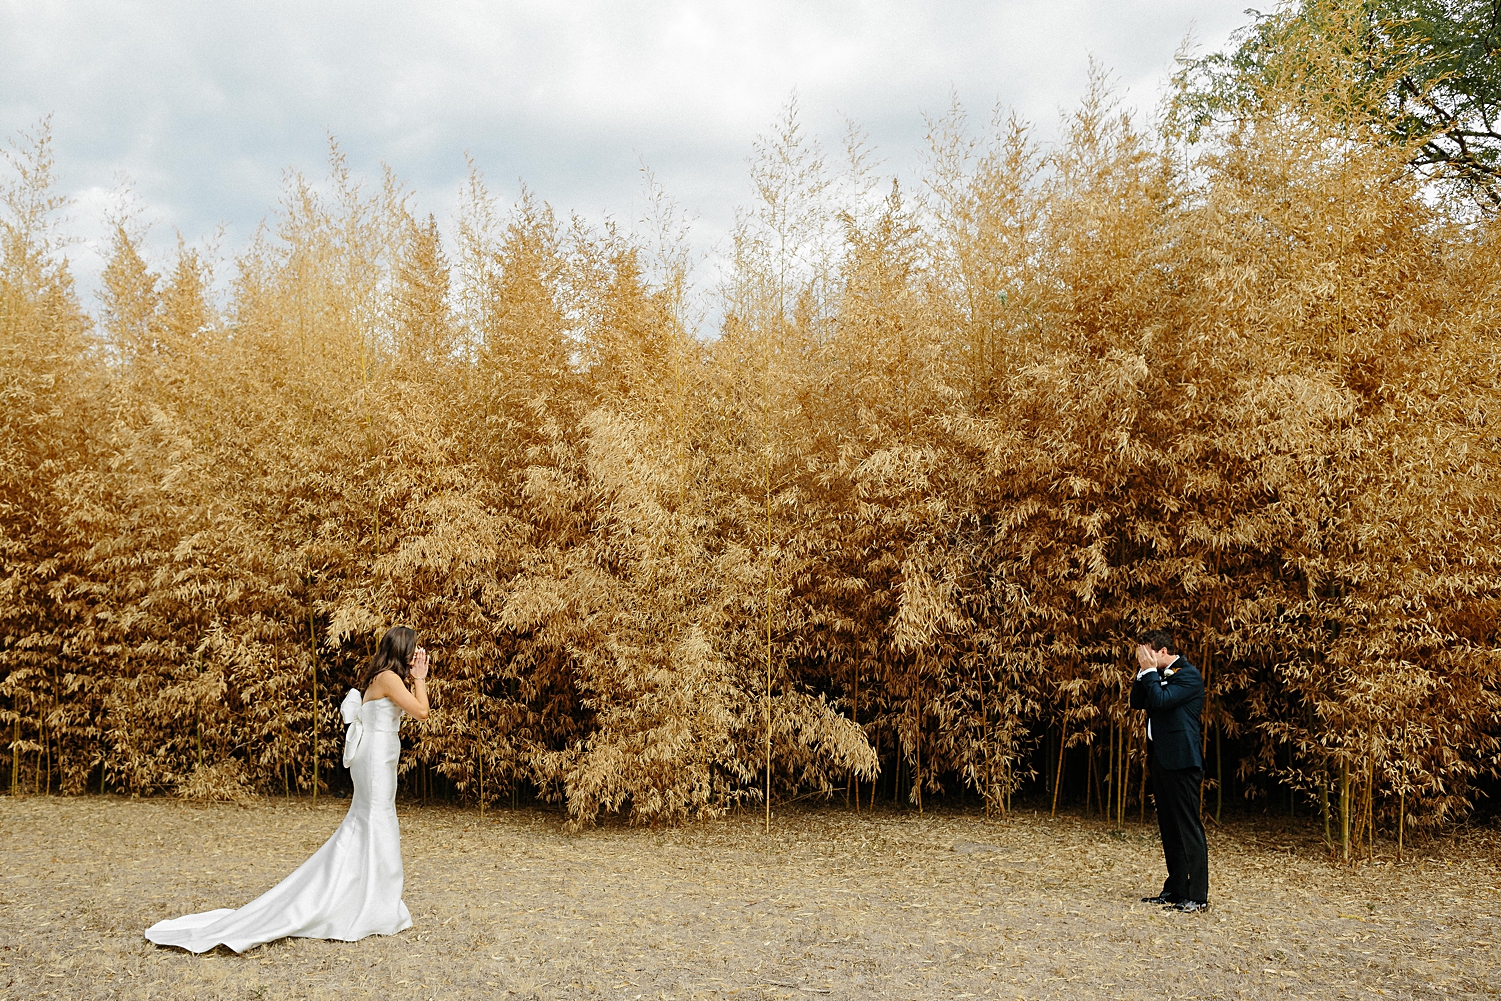 brideand groom seeing each other first time wedding look reaction in front of golden plants Matties Austin